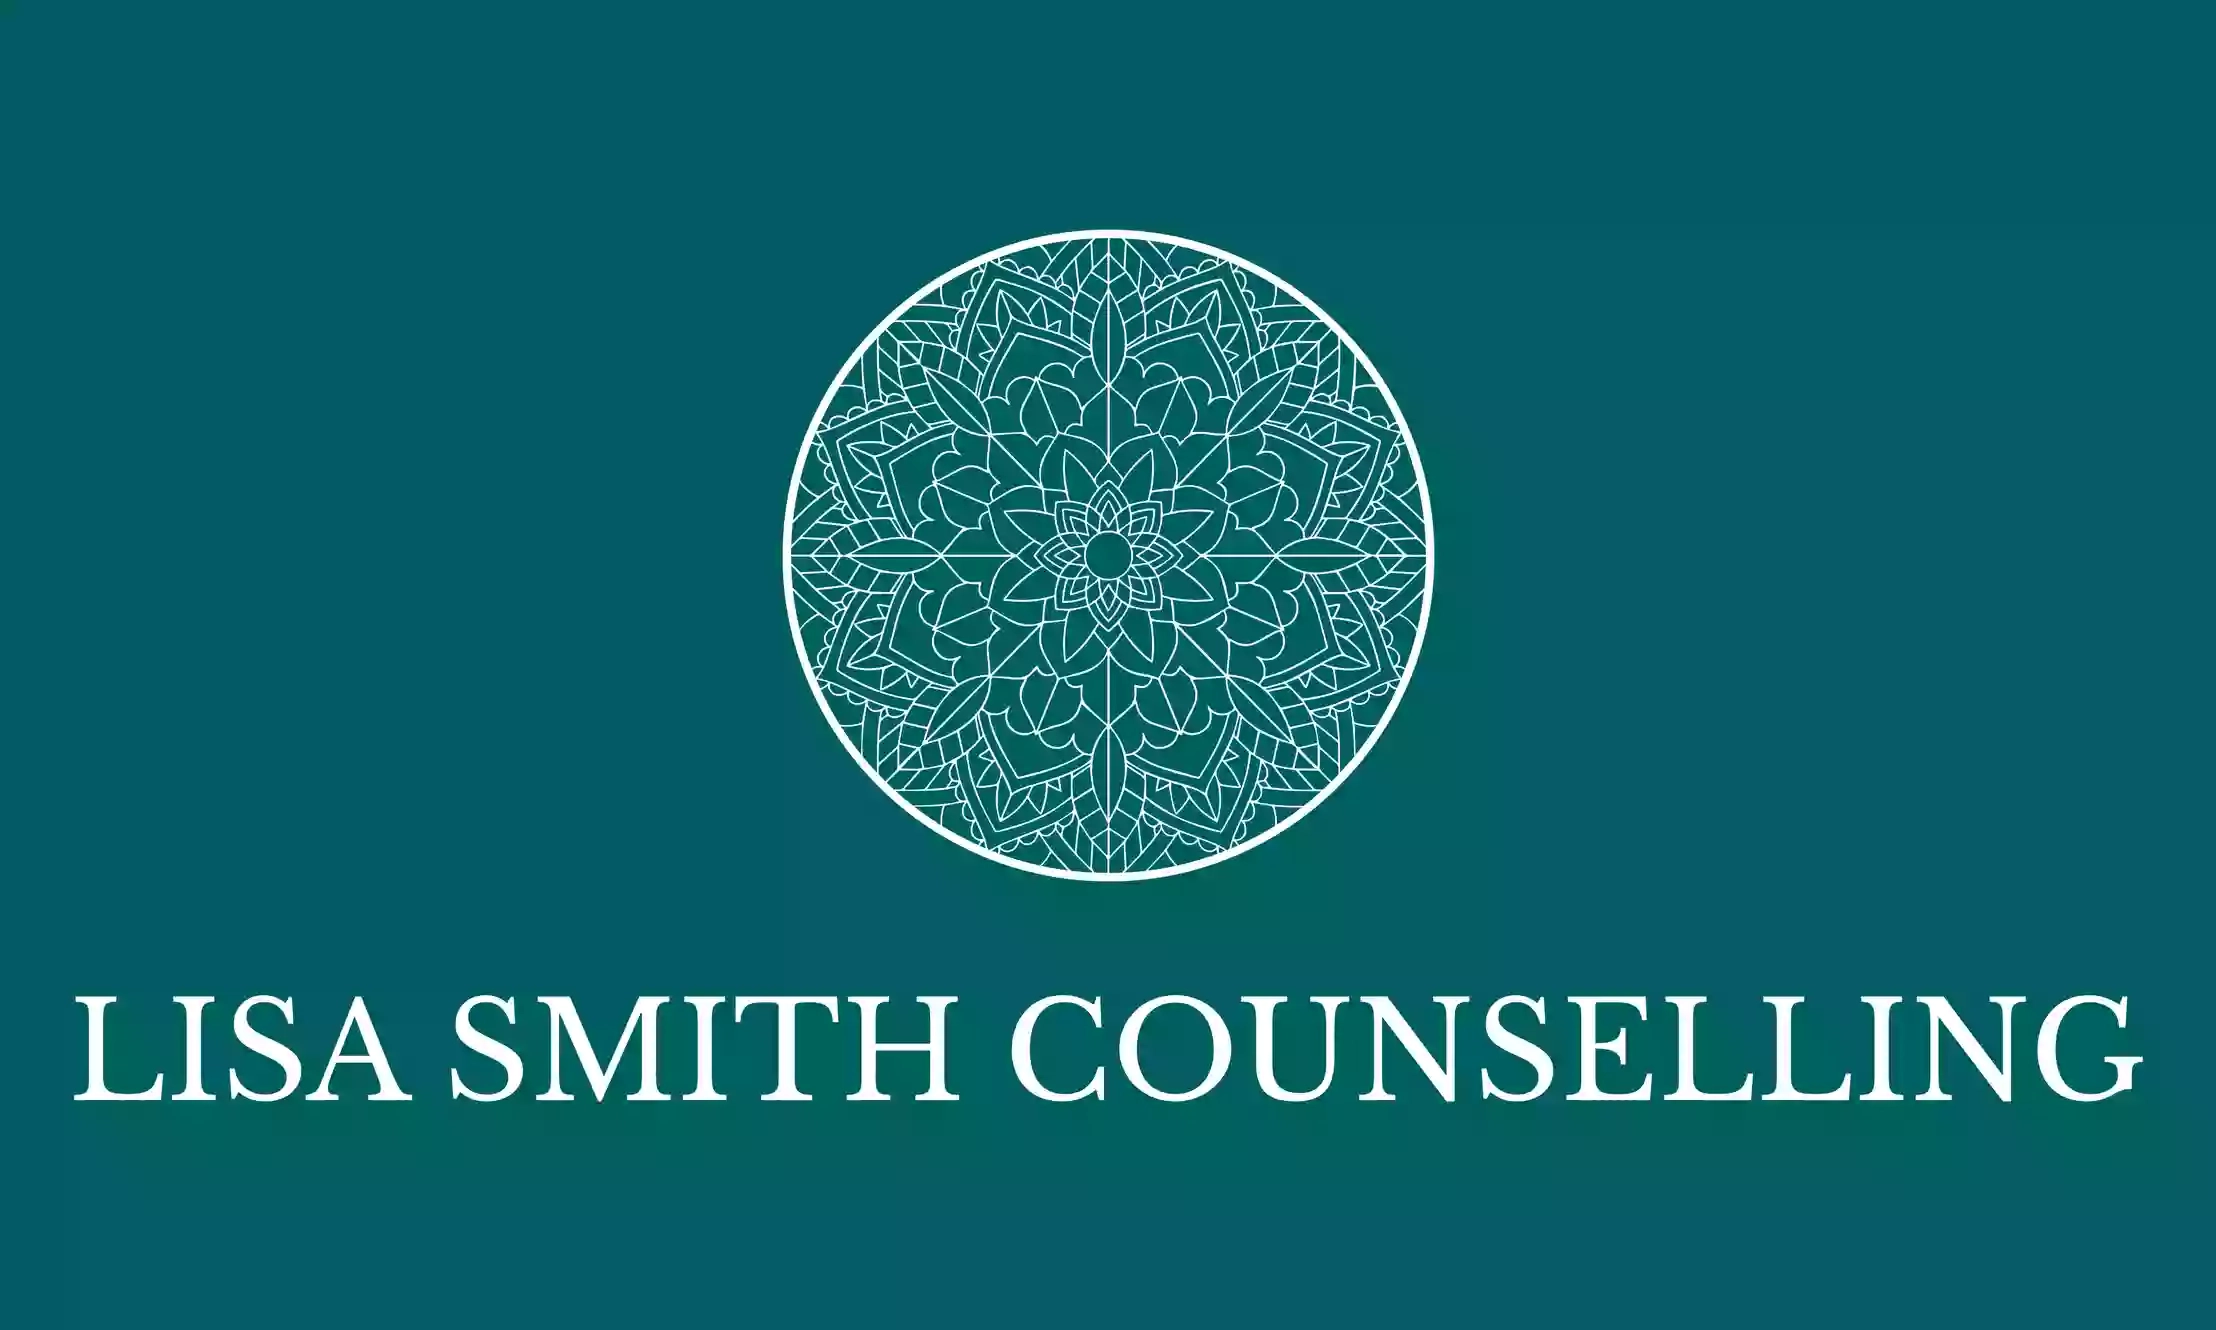 Lisa Smith Counselling